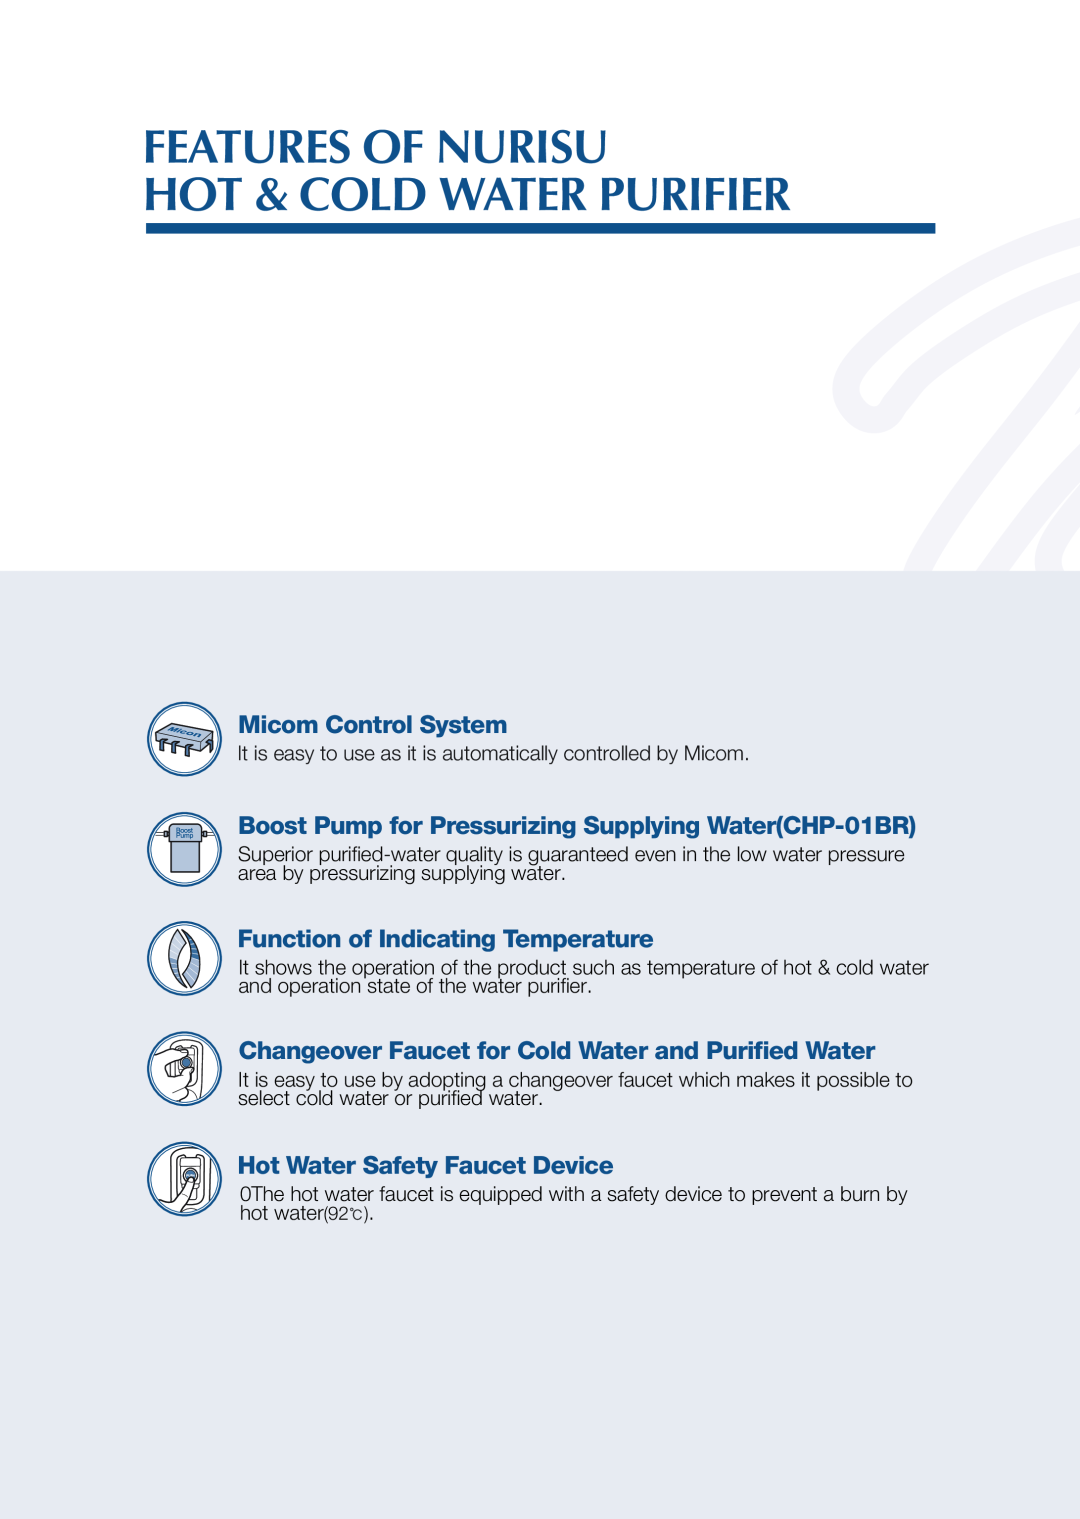 Coway CHP-01BU Features Of Nurisu Hot & Cold Water Purifier, Micom Control System, Function of Indicating Temperature 